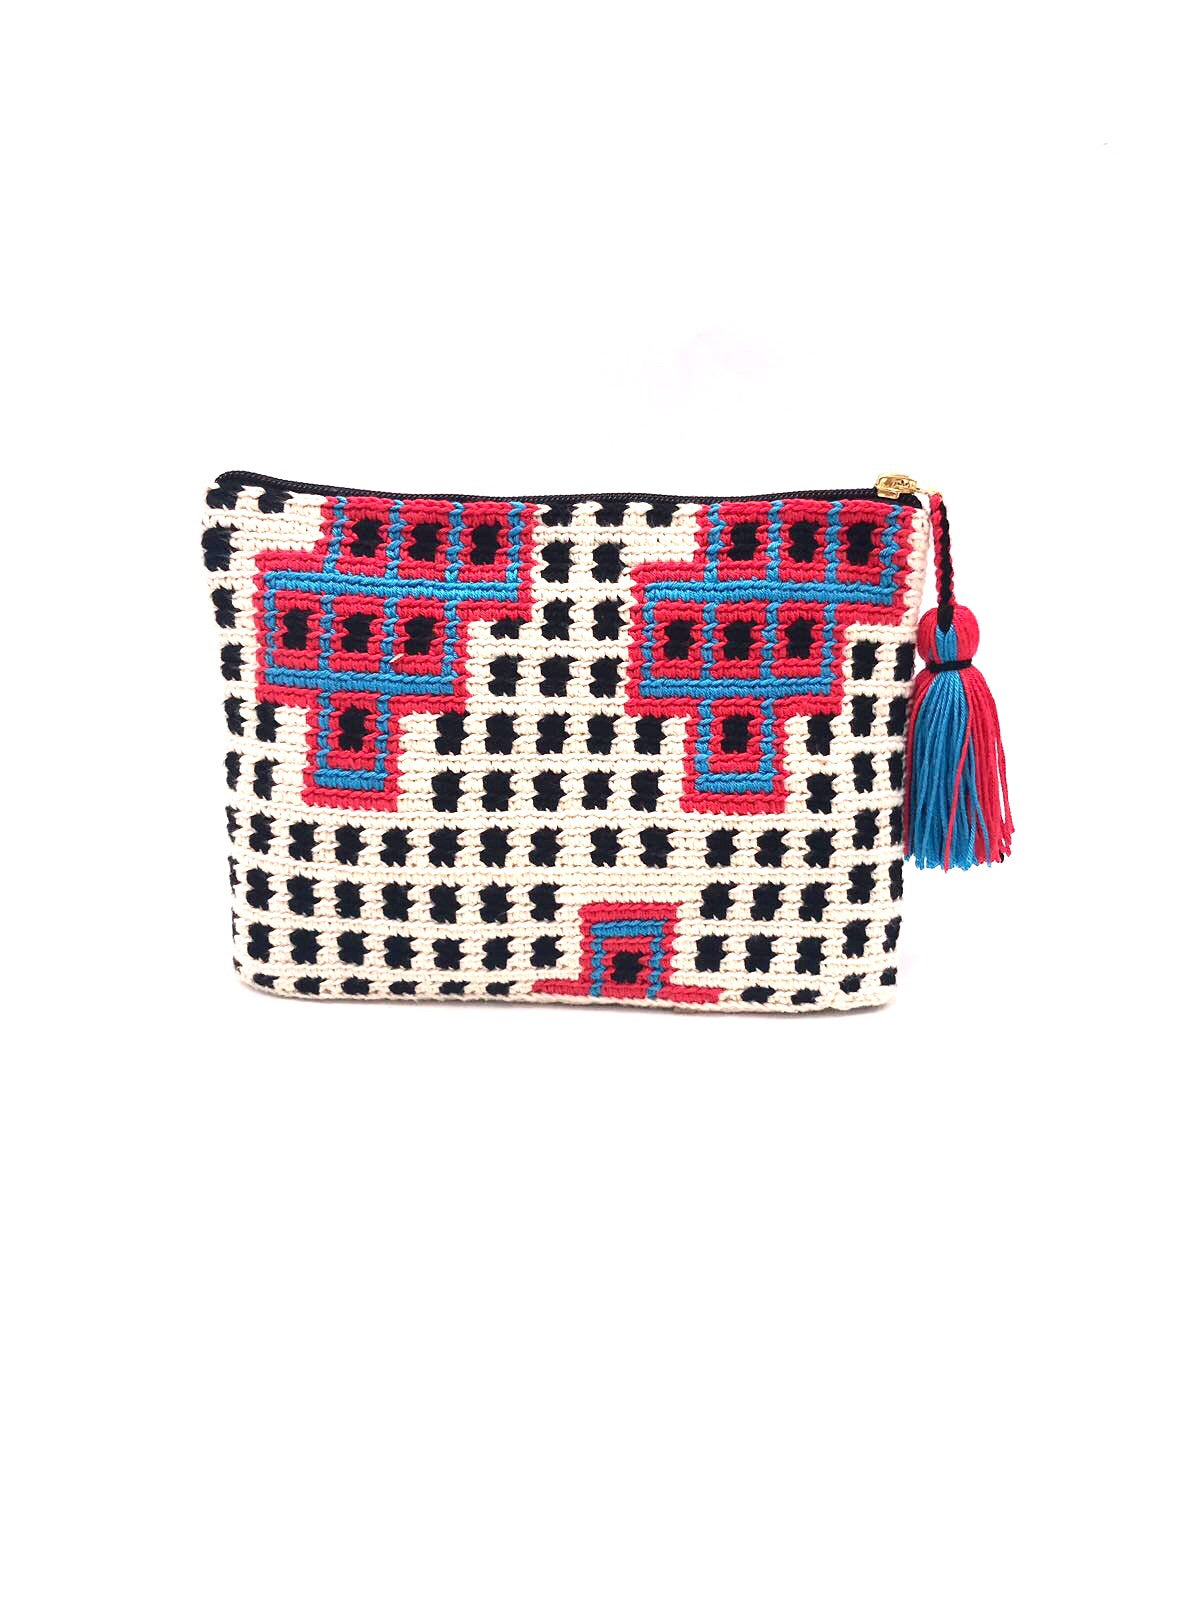 Clutch, polkadot pattern, with red squares and blue sequence.